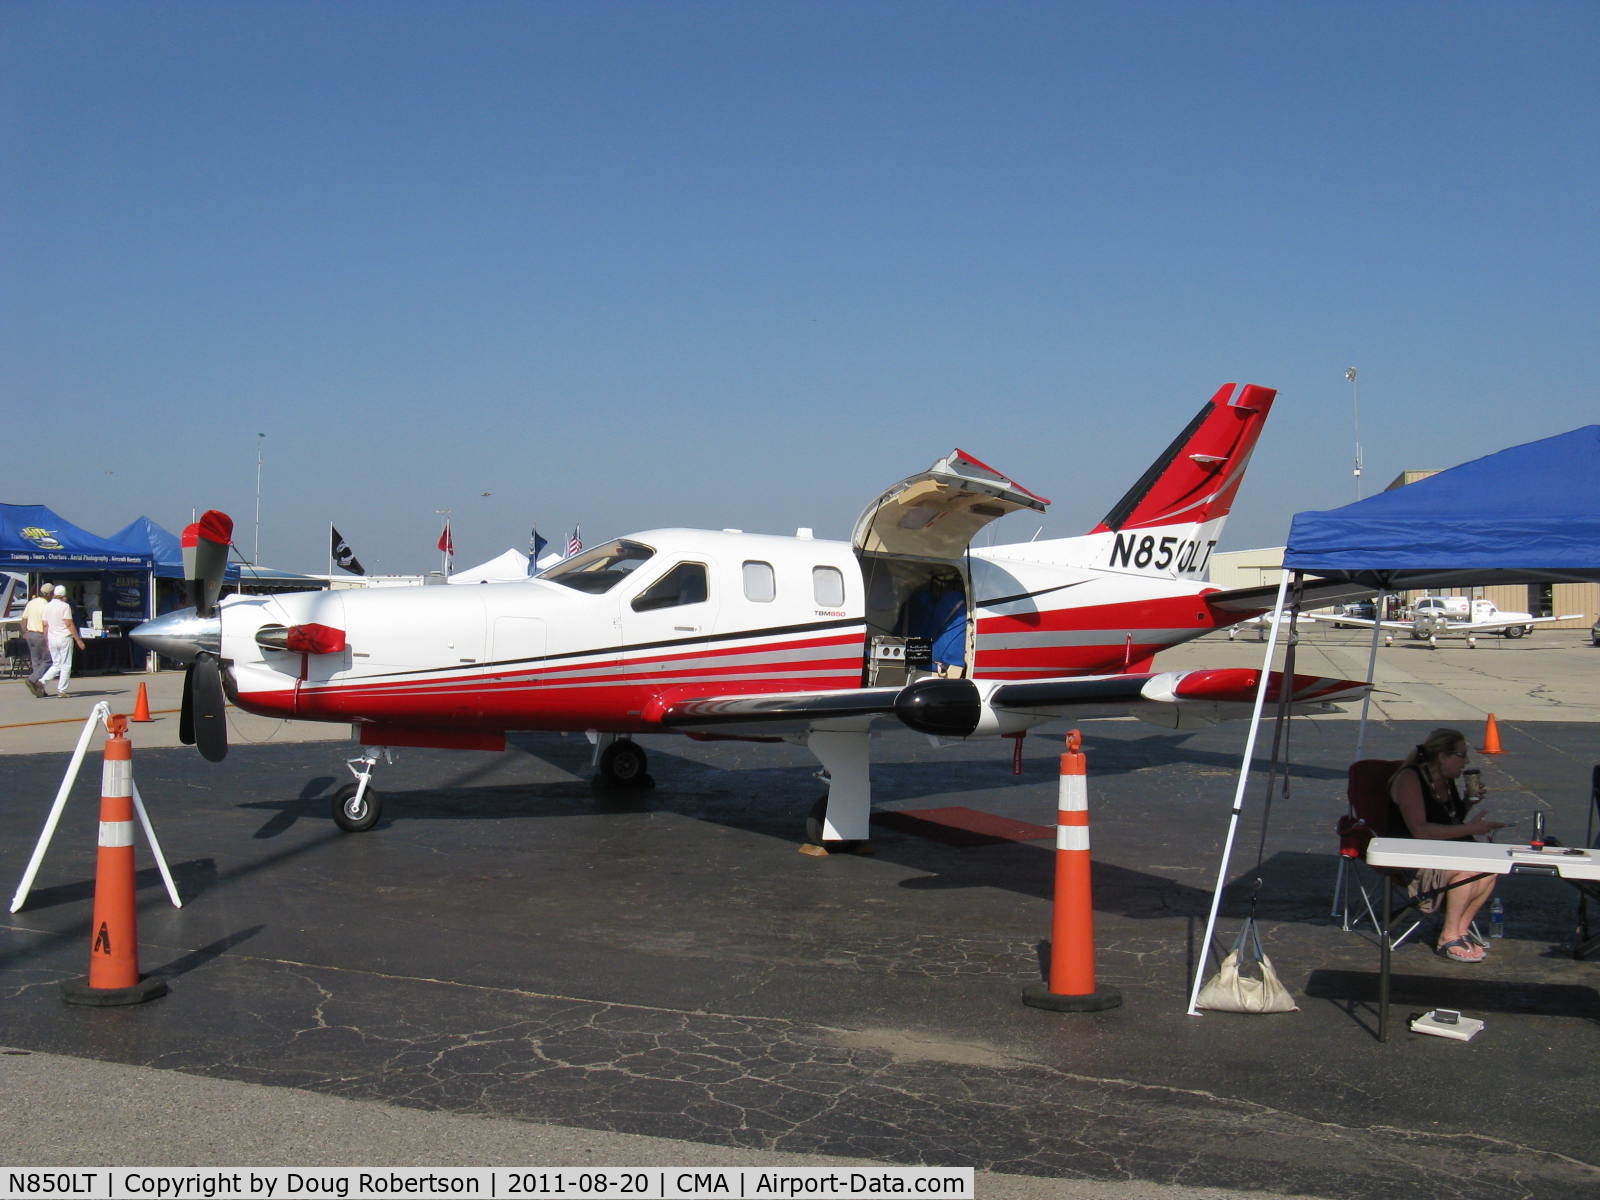 N850LT, Socata TBM-700 C/N 585, SOCATA TBM 700C, one P&W(C)PT6A-64 Turboprop 1,580 shp flat rated at 700 shp